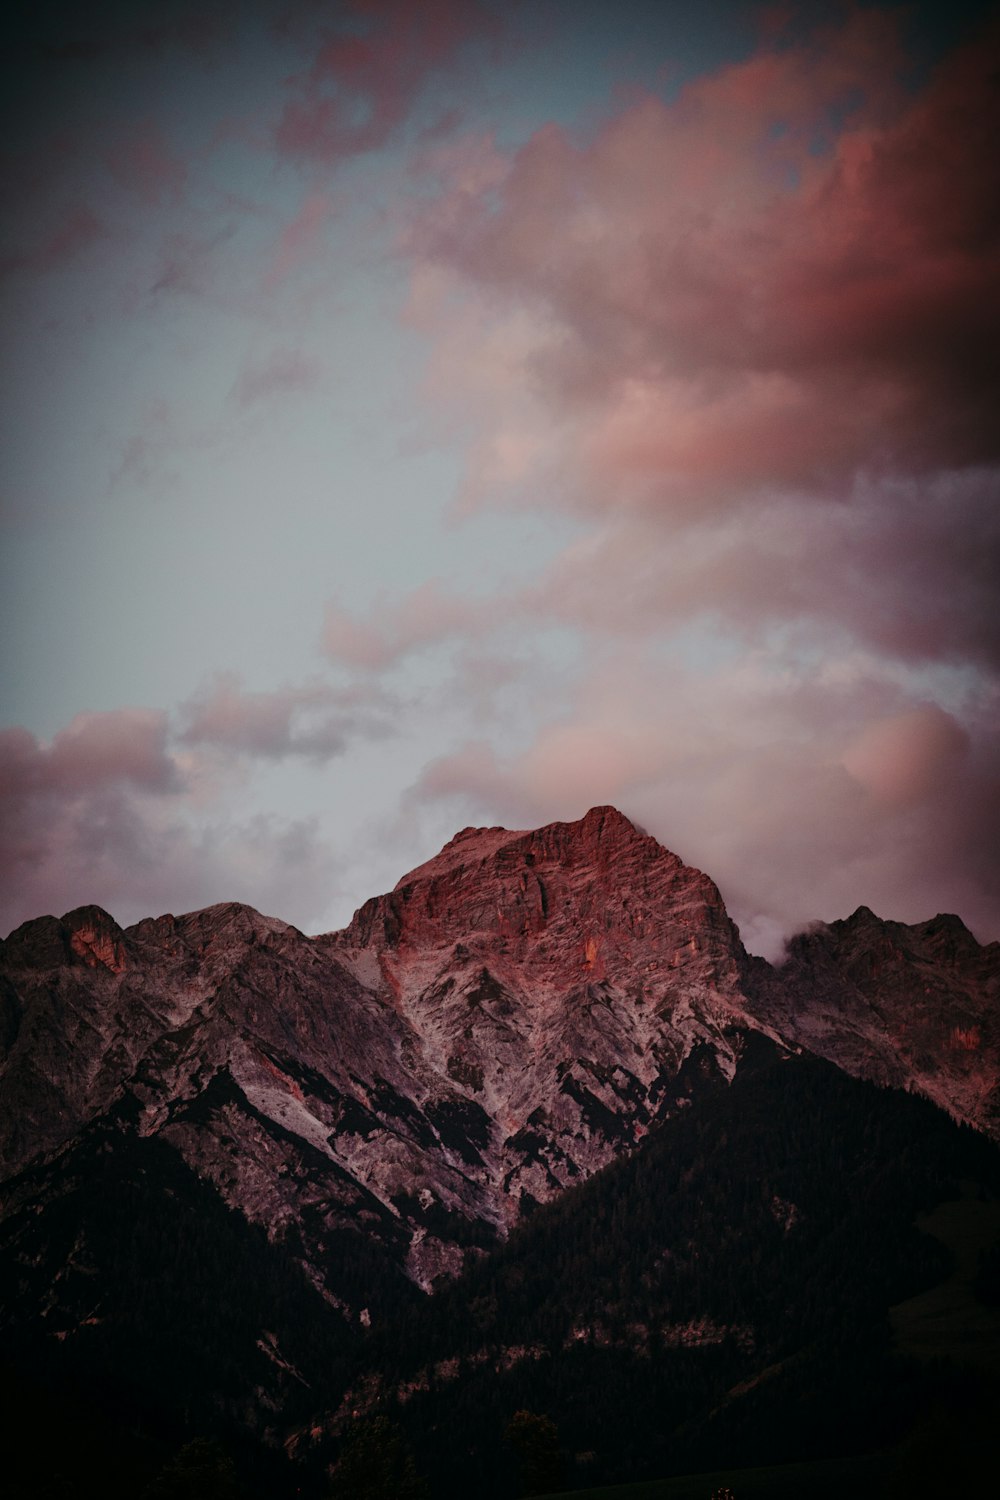 a mountain with a pink sky in the background